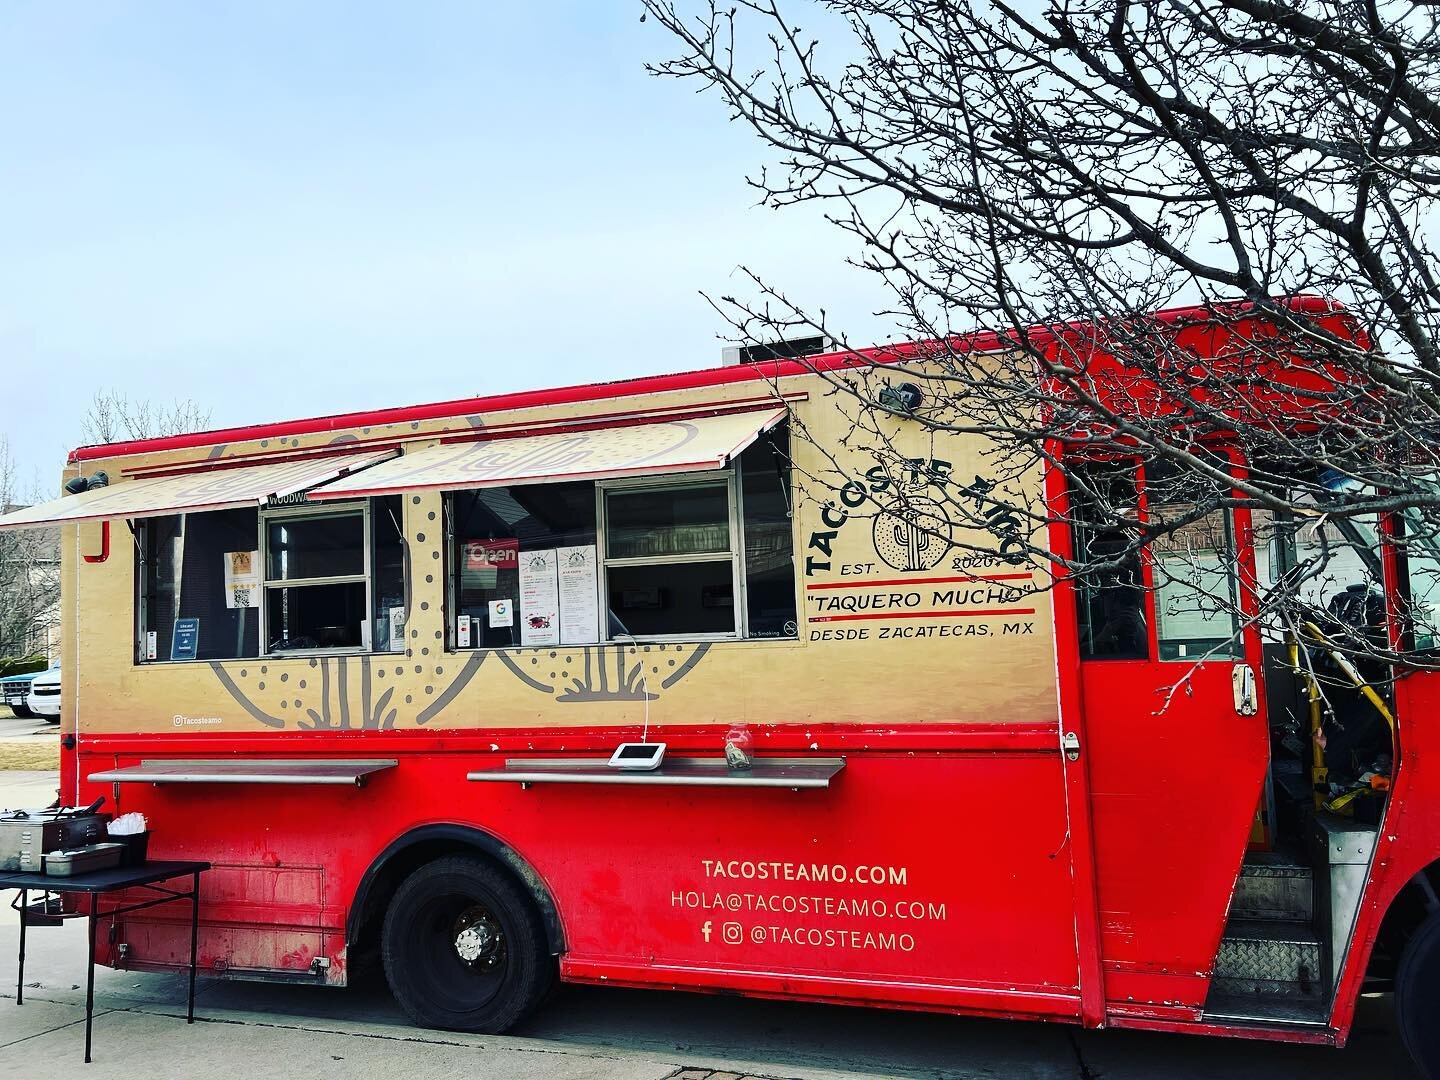 Tacos te Amo is back on the road check out our new website tacosteamo.com and today we are at Fairways of Macomb until 7:30 follow us for future events